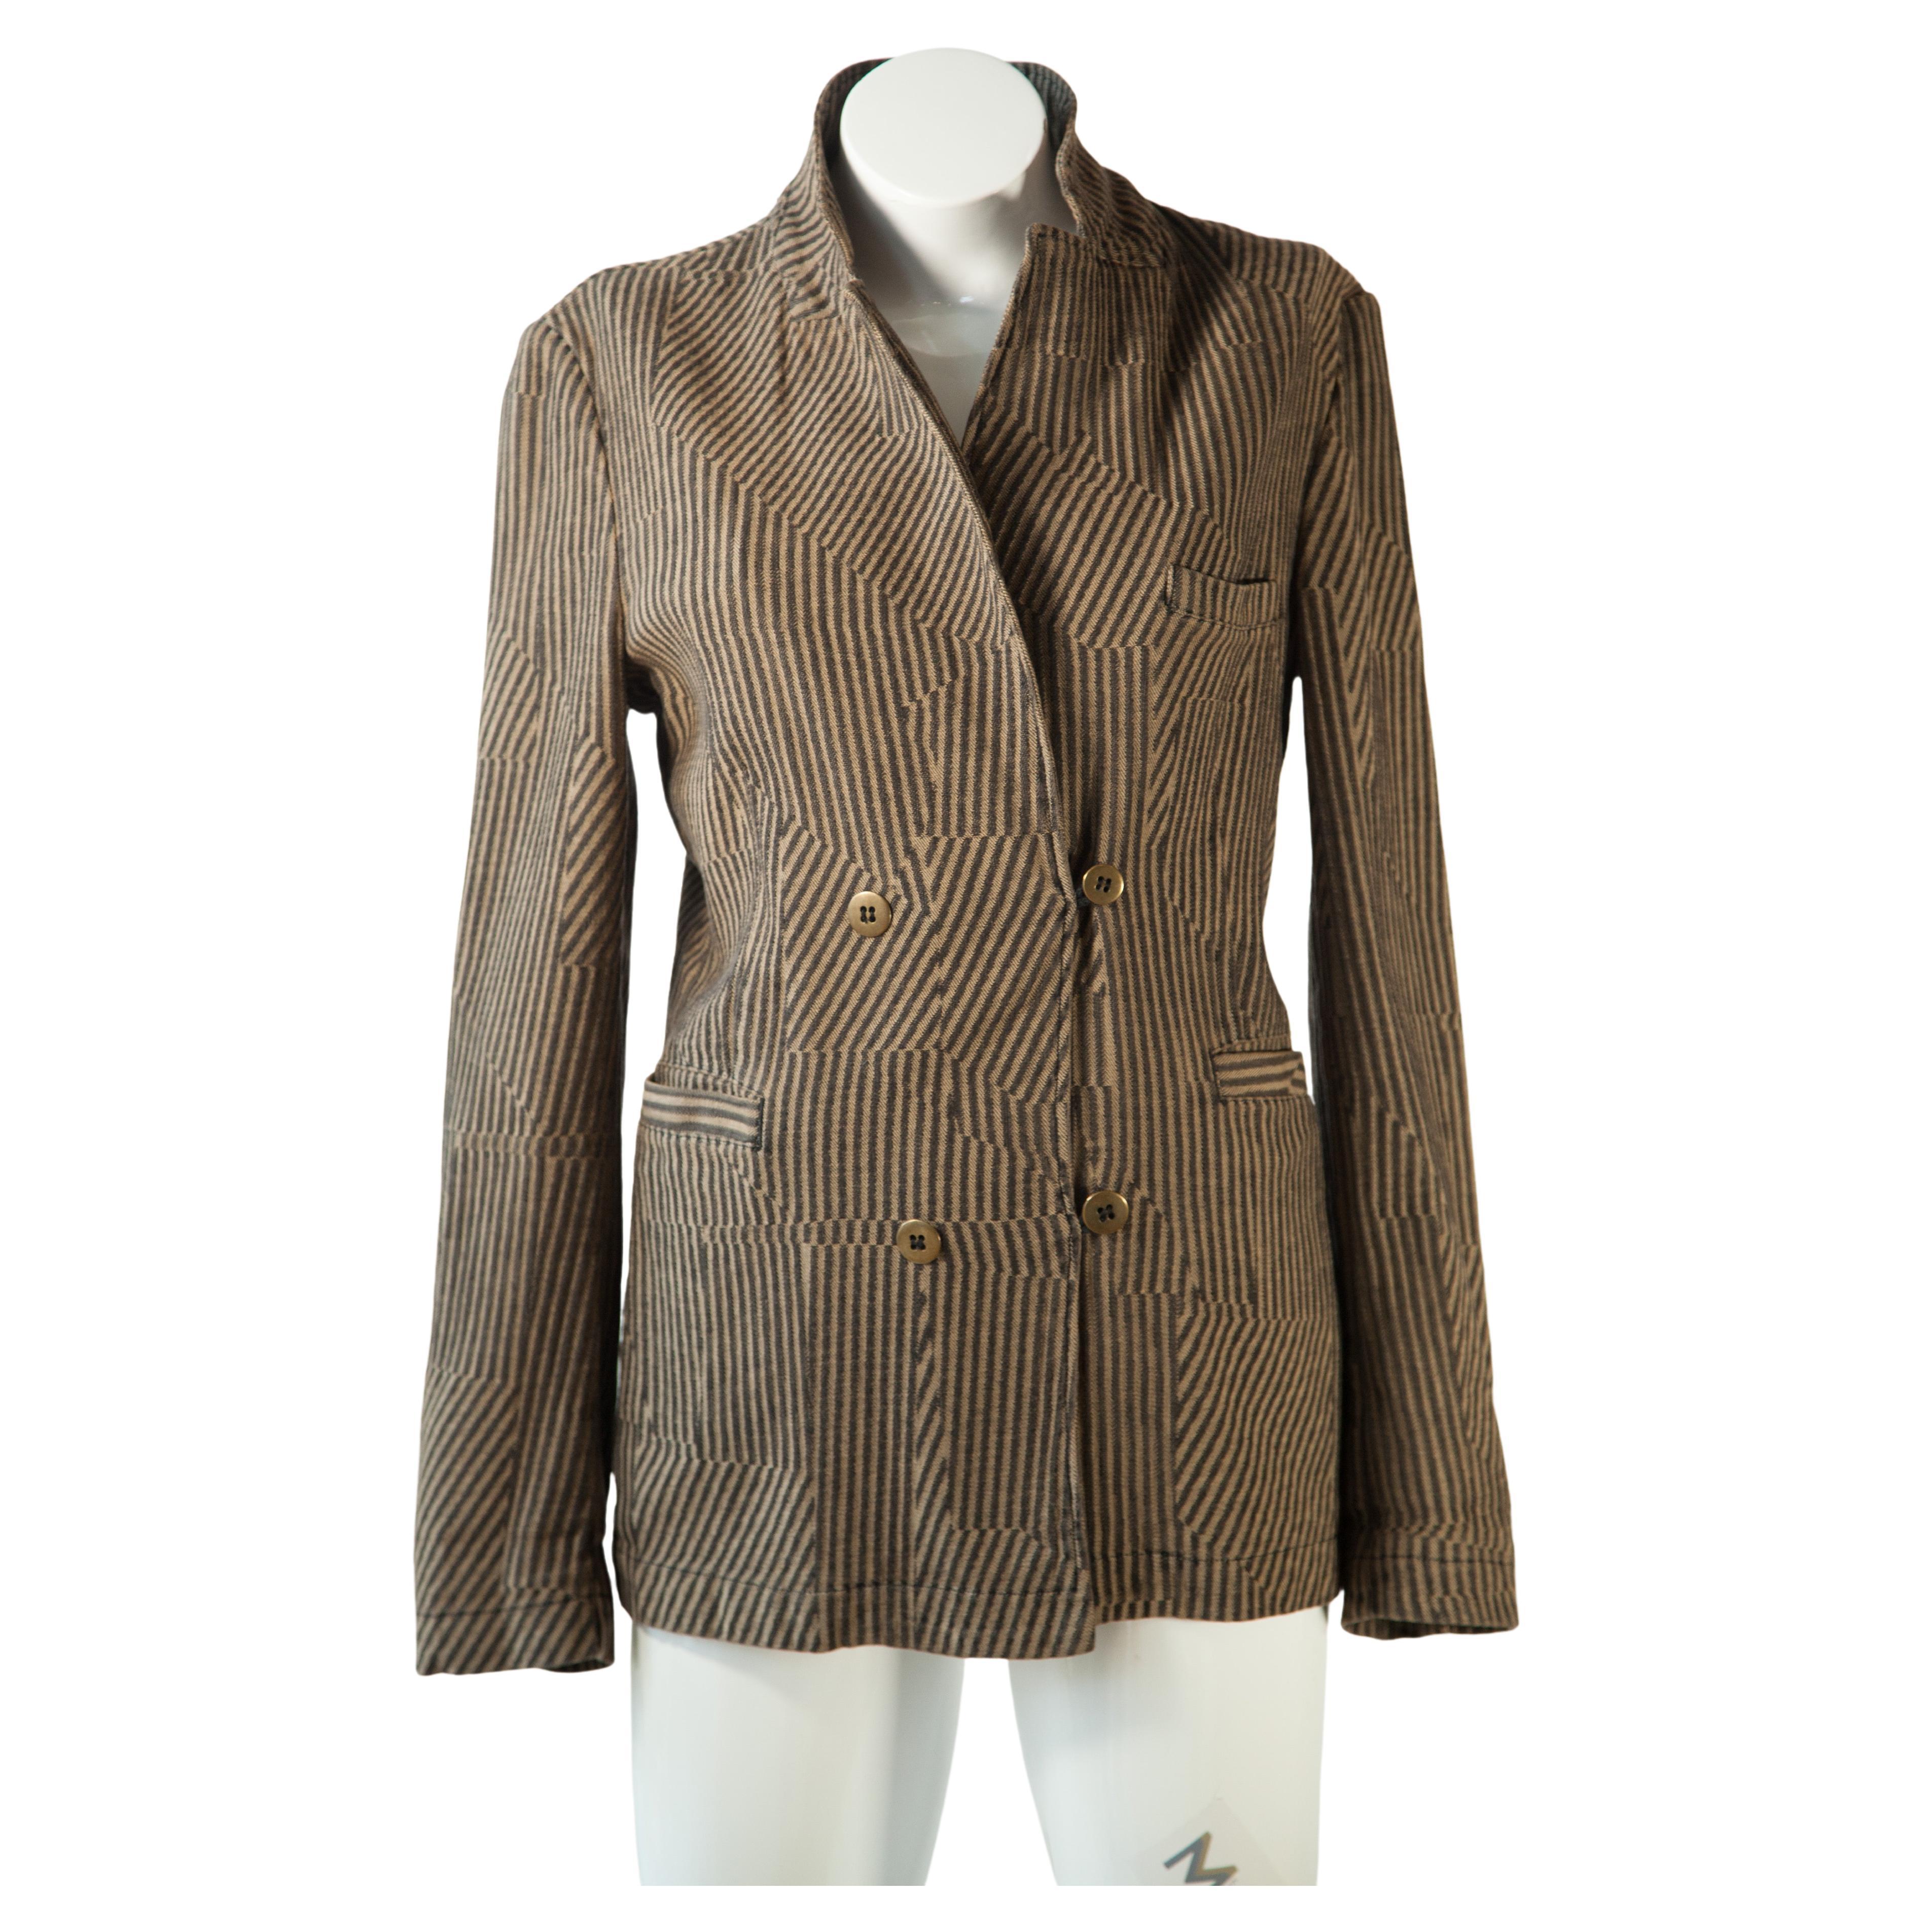 Maison Margiela, Fitted Jacket with Asymmetrical Stripe Print and 4-button front For Sale